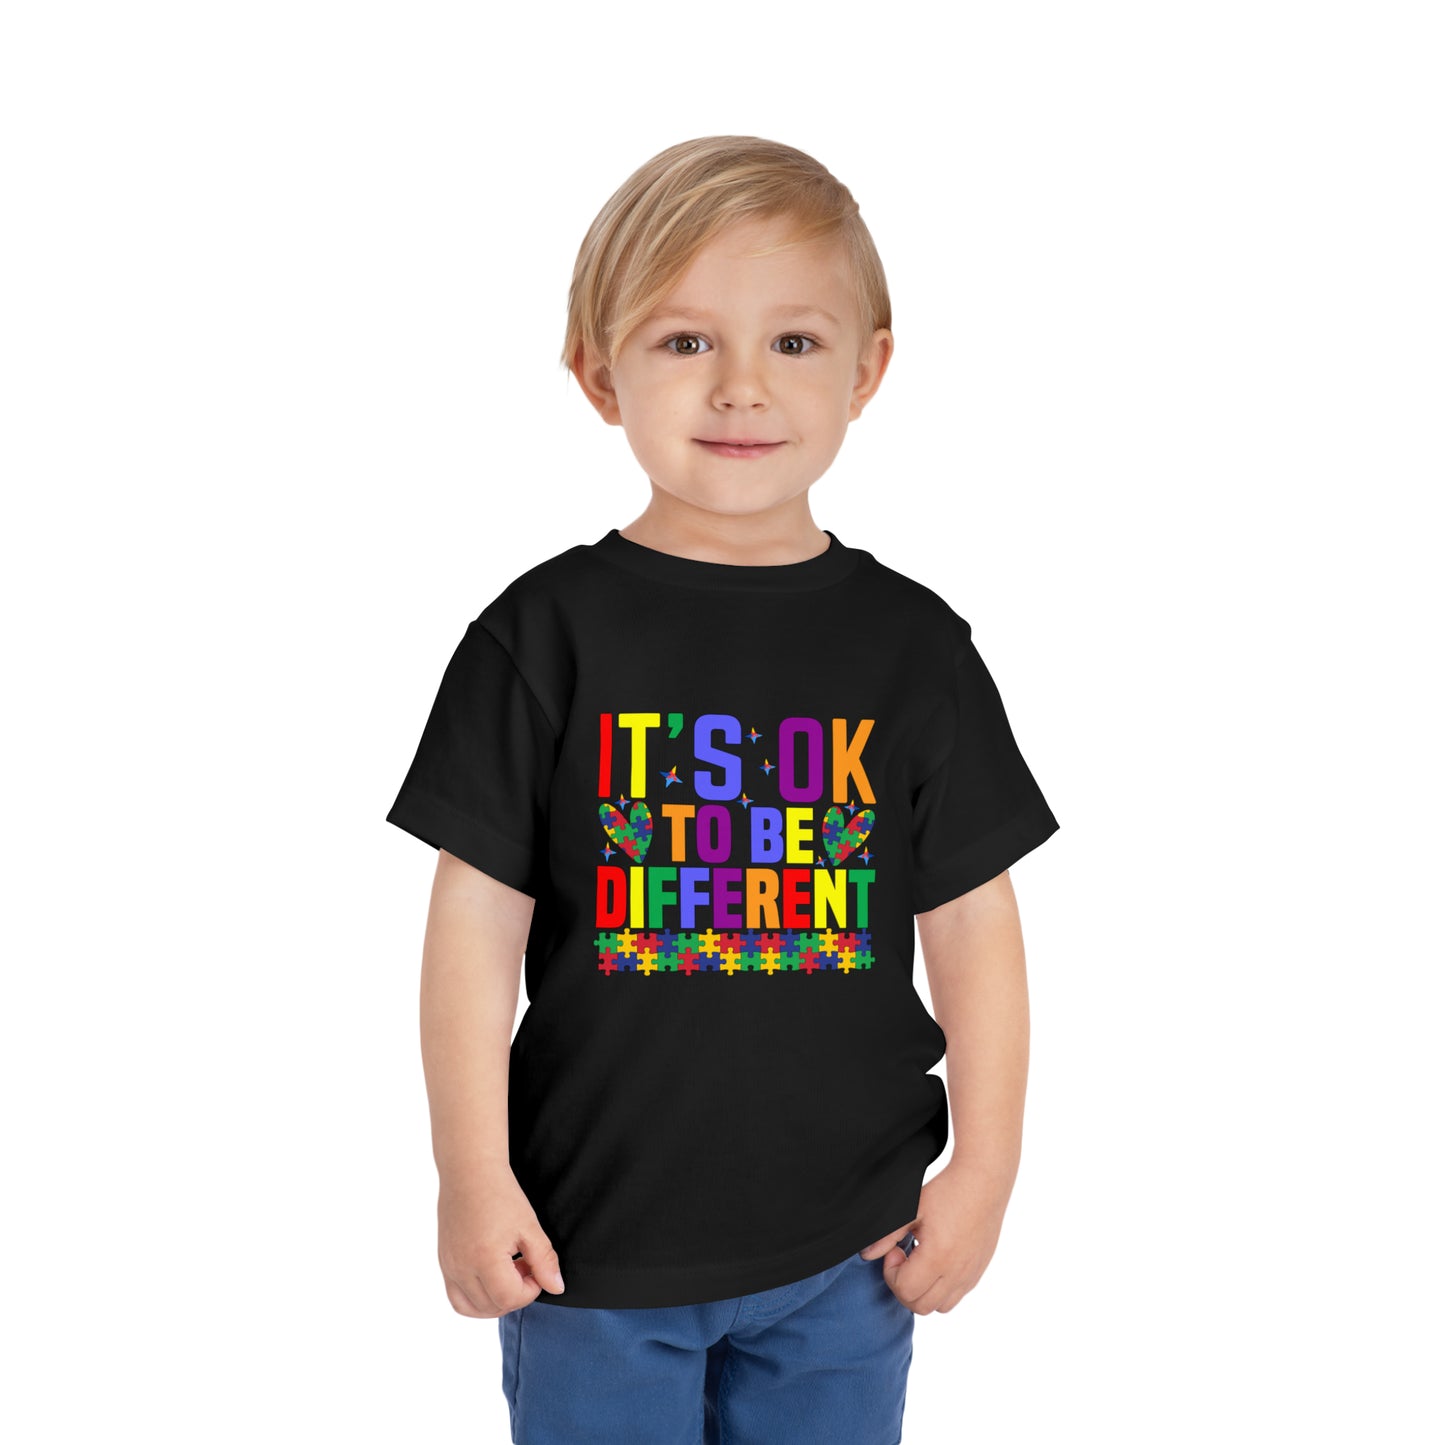 It's OK to be different Autism Acceptance Awareness Advocate Toddler Short Sleeve Tee